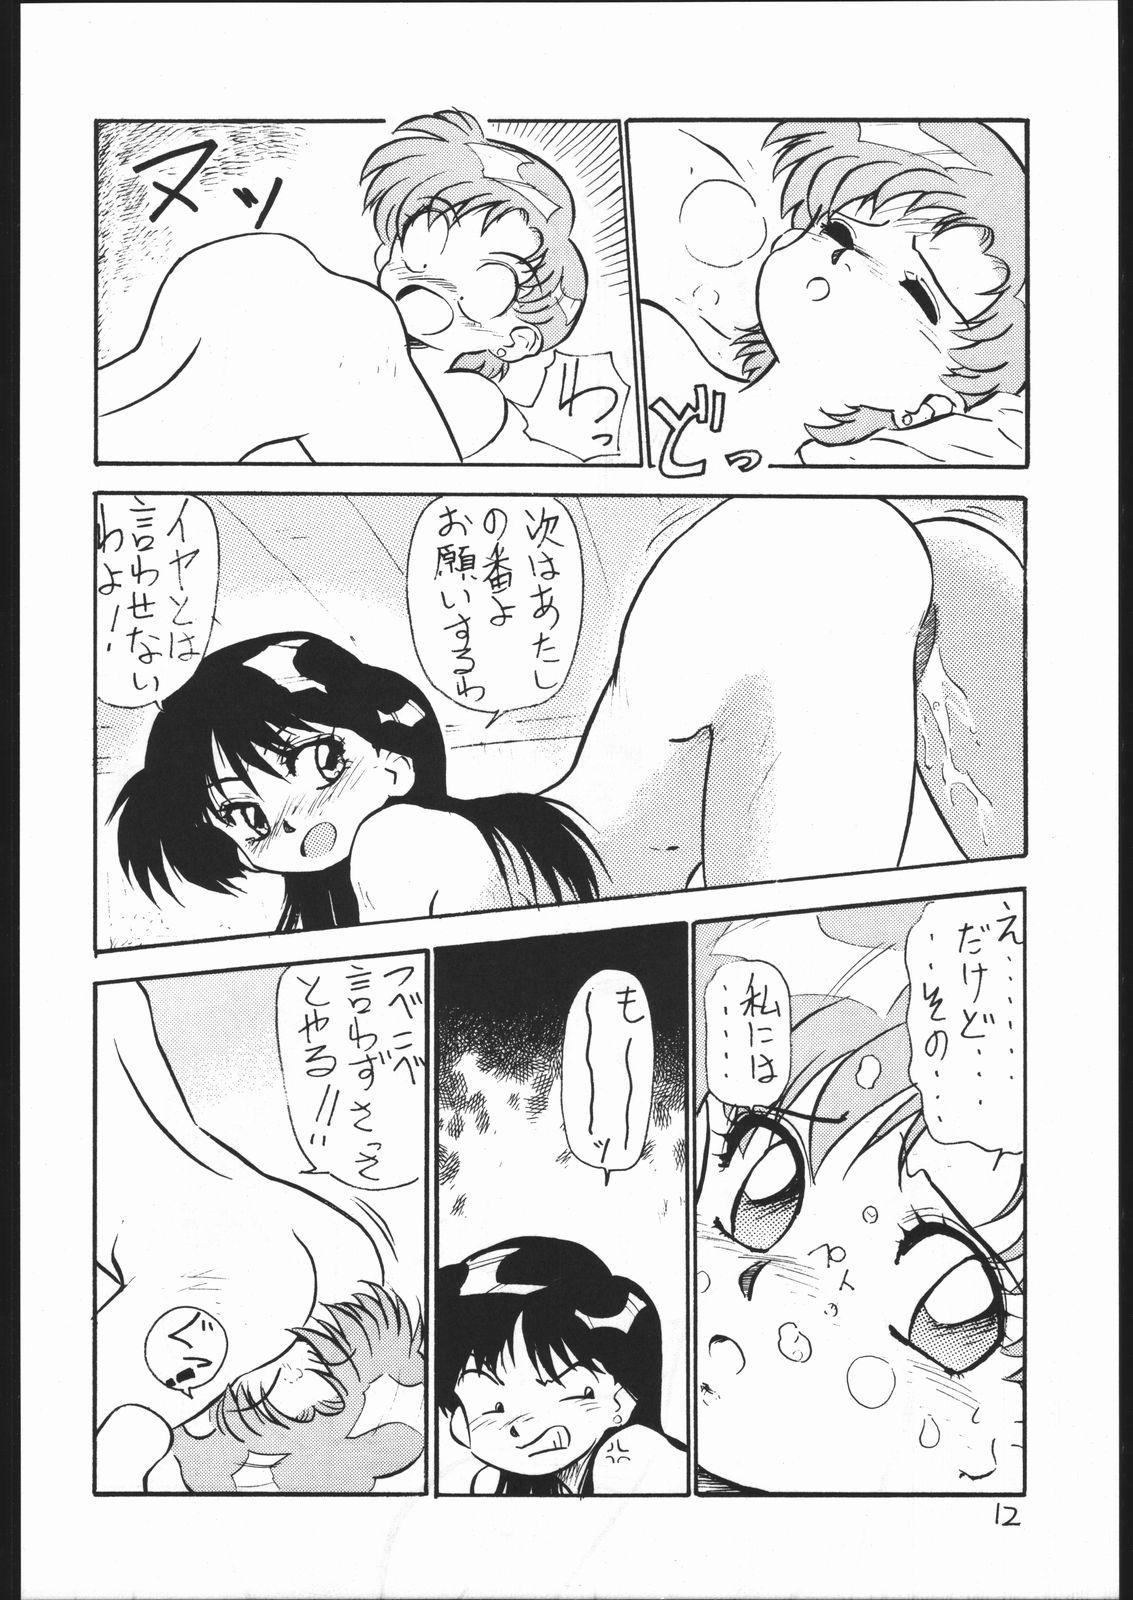 Nice Tits V・H・S・M Vol. 1 - Sailor moon Anal Play - Page 11